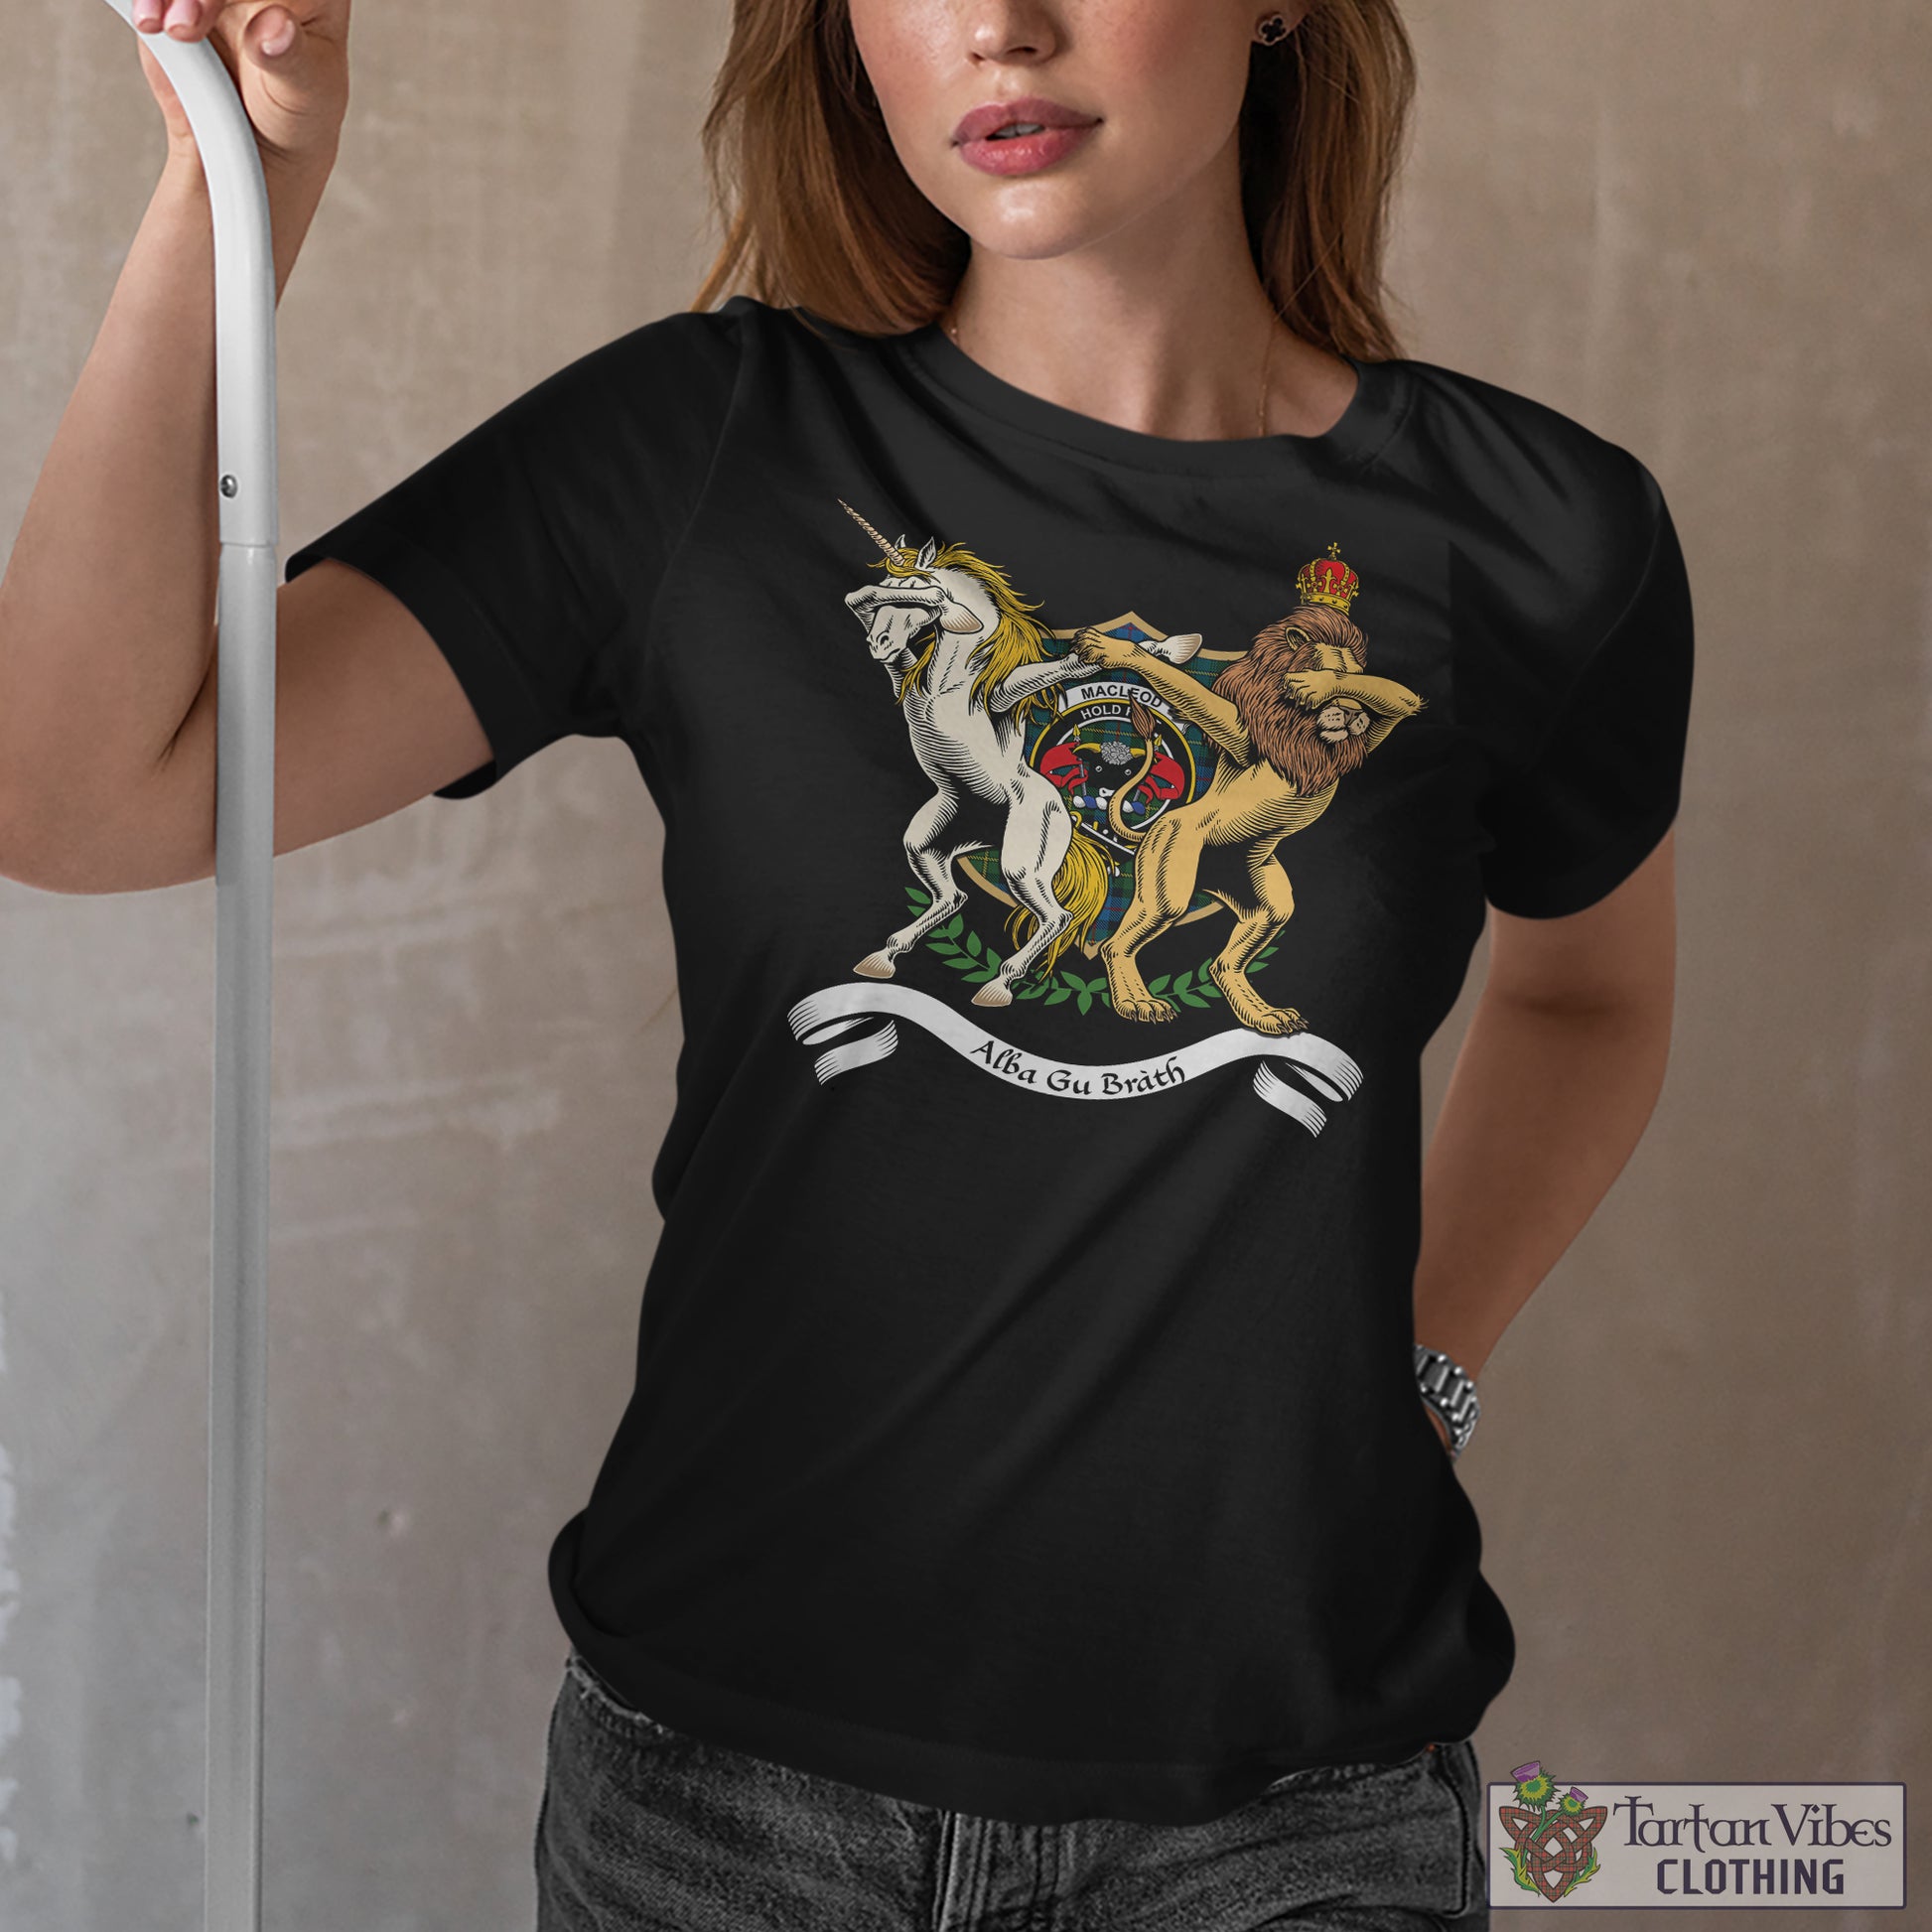 Tartan Vibes Clothing MacLeod of Skye Family Crest Cotton Women's T-Shirt with Scotland Royal Coat Of Arm Funny Style